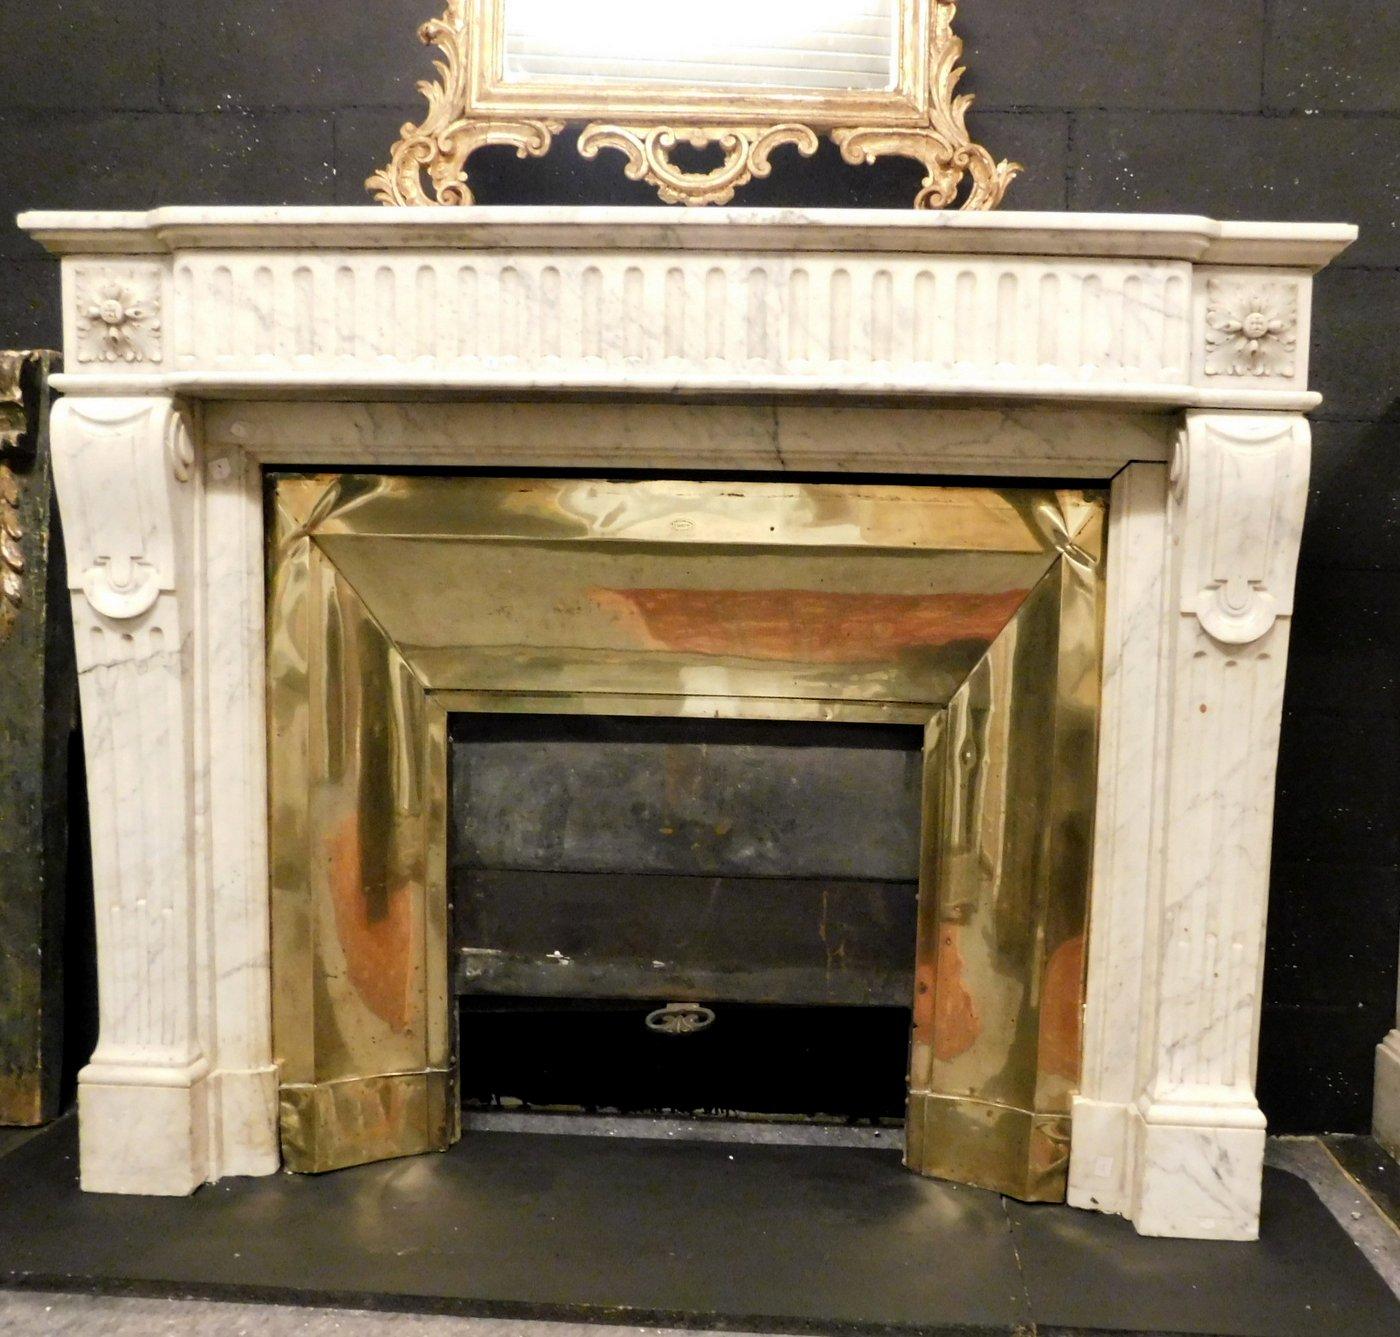 Antique Louis XVI white marble fireplace, hand carved with typical period flowers and sculptures on the uprights, sold with original brass counter-heart (no front wings and fireplace decorations), handmade in the late 18th century in France, it came